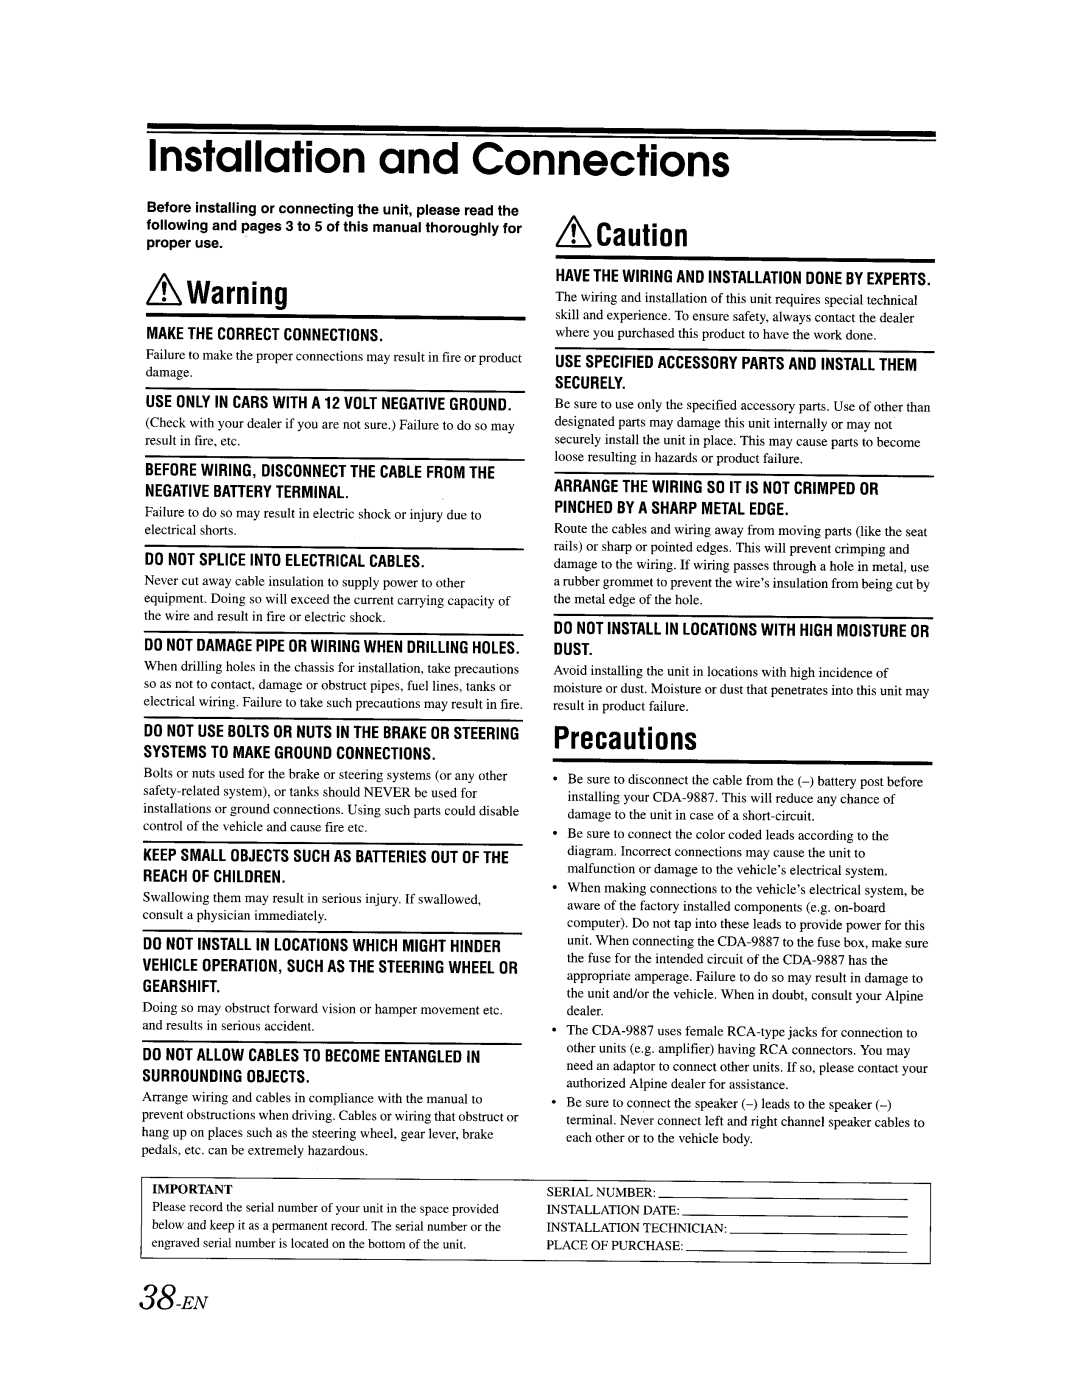 Alpine CDA-9887 owner manual 38-EN, ~Warning, ~Caution, Installation and Connections, Precautions 